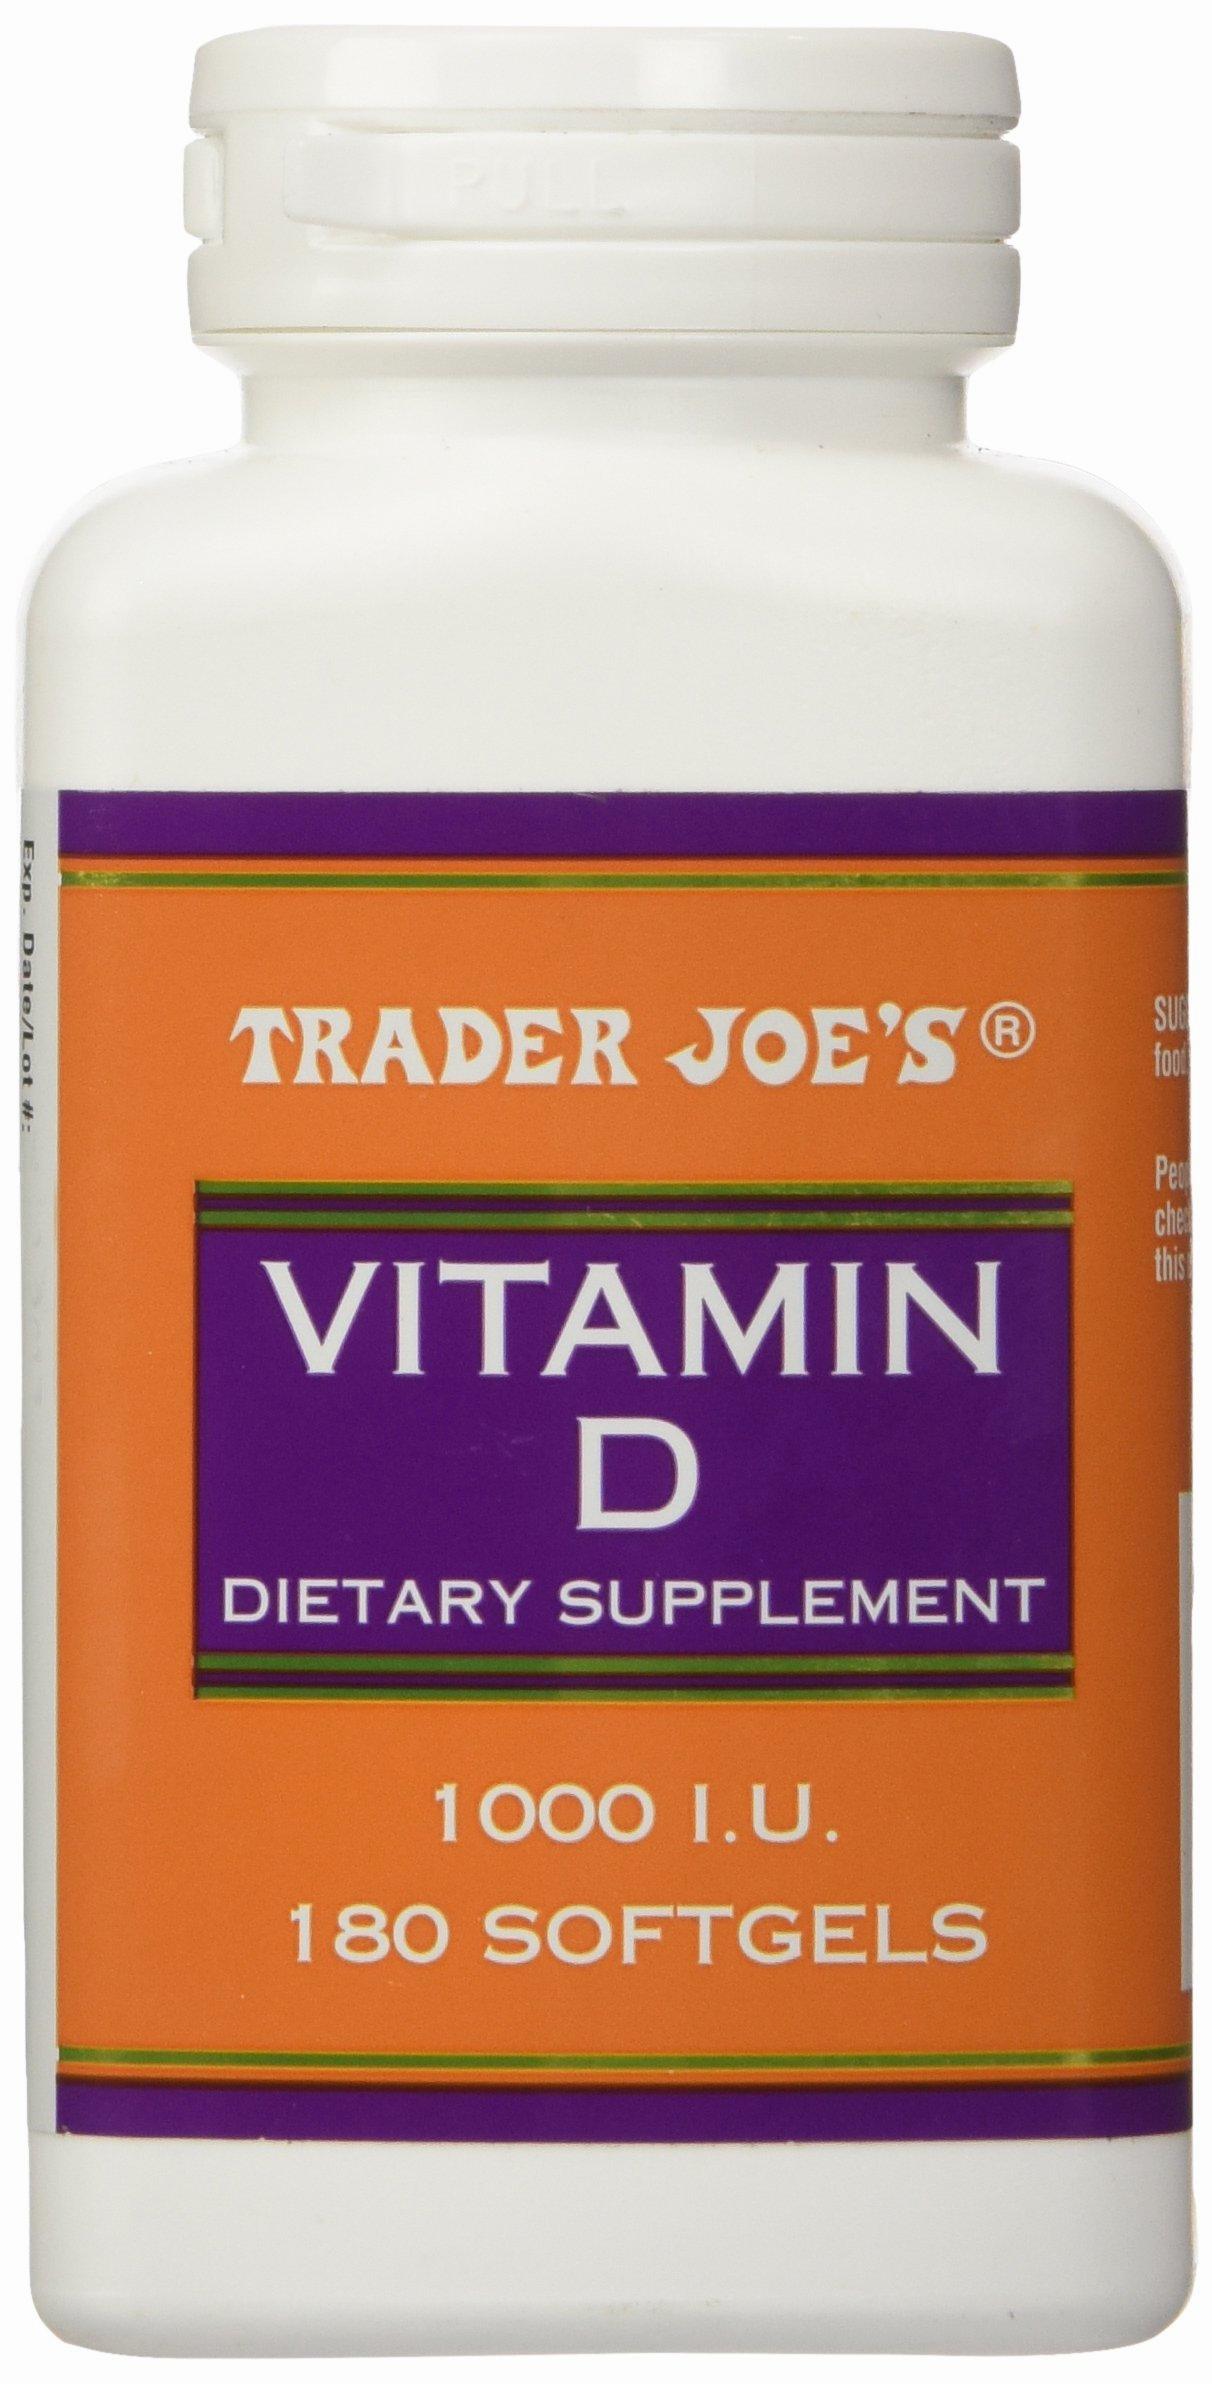 A bottle of Trader Joes Vitamin D dietary supplement, containing 180 softgels, each with 1000 IU of Vitamin D.